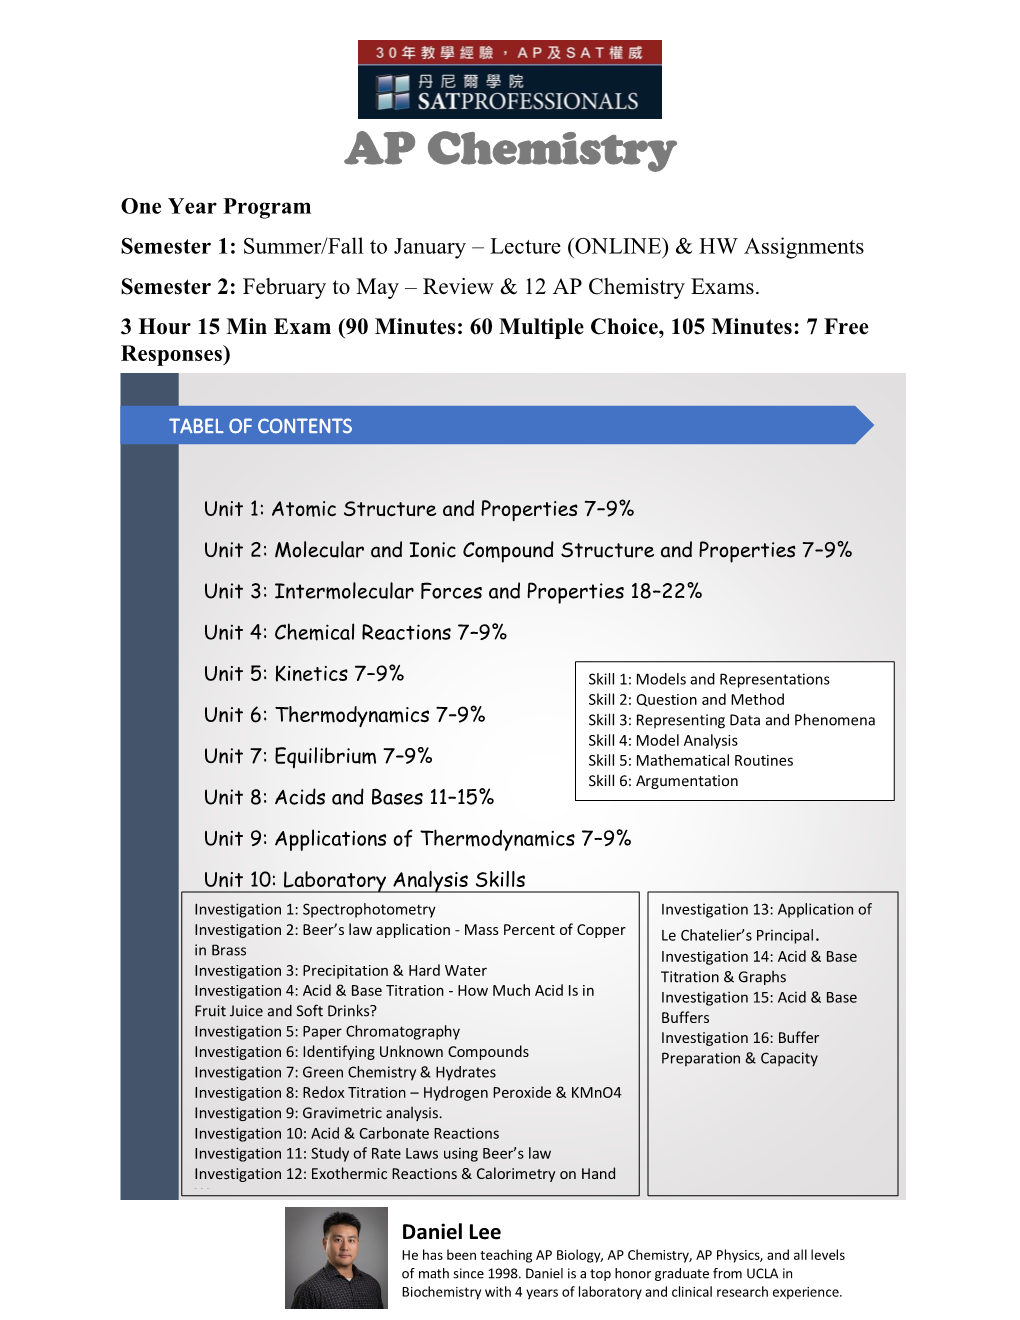 AP Chemistry One Year Program Semester 1: Summer/Fall to January – Lecture (ONLINE) & HW Assignments Semester 2: February to May – Review & 12 AP Chemistry Exams